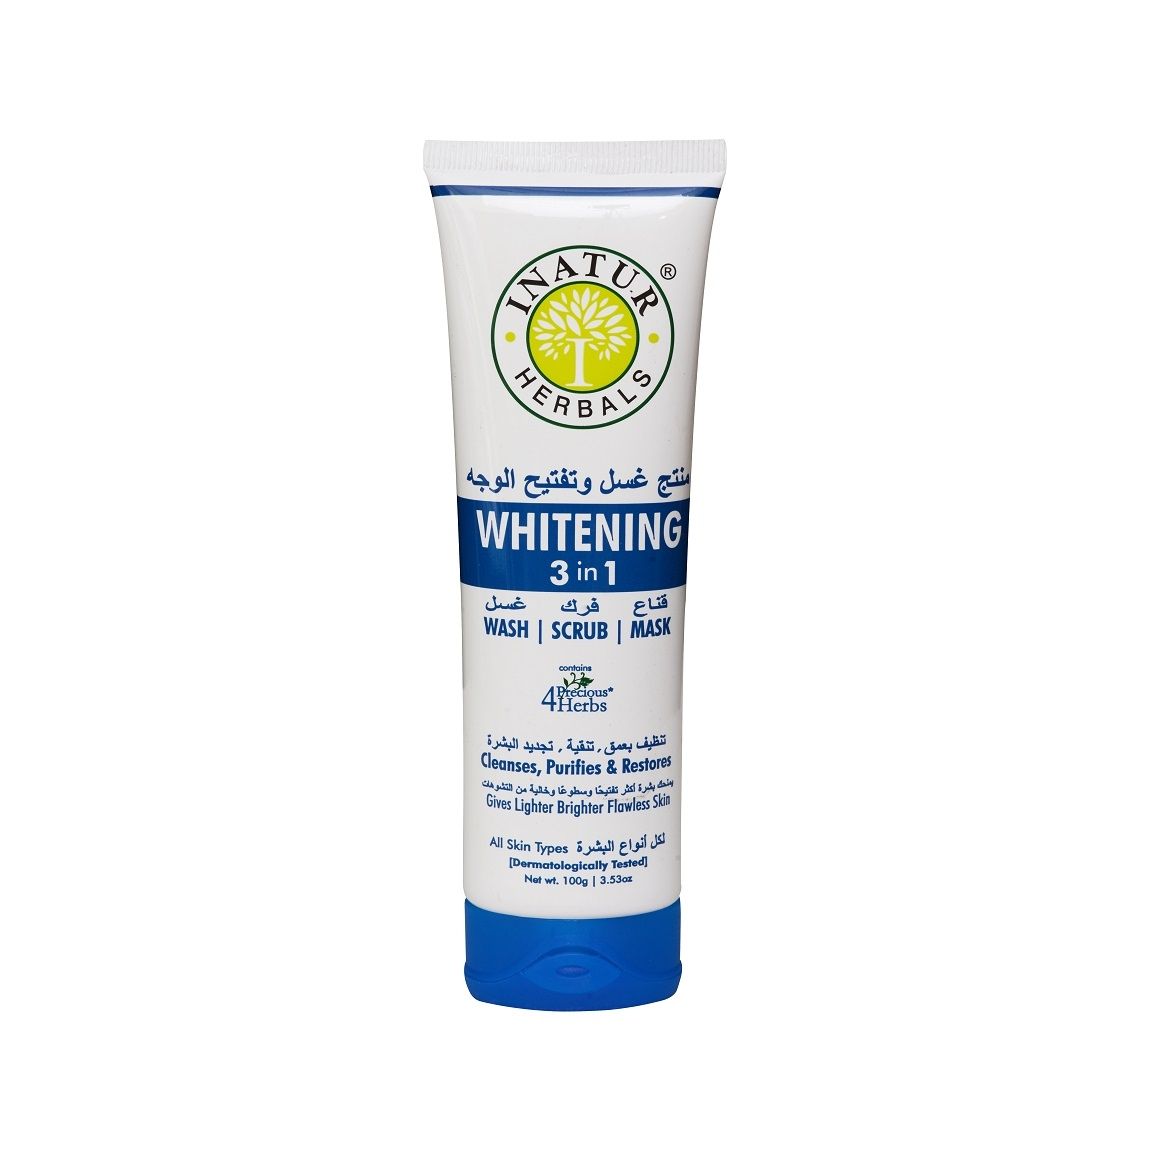 Inatur Whitening 3 In 1 Face Wash (Scrub + Mask)